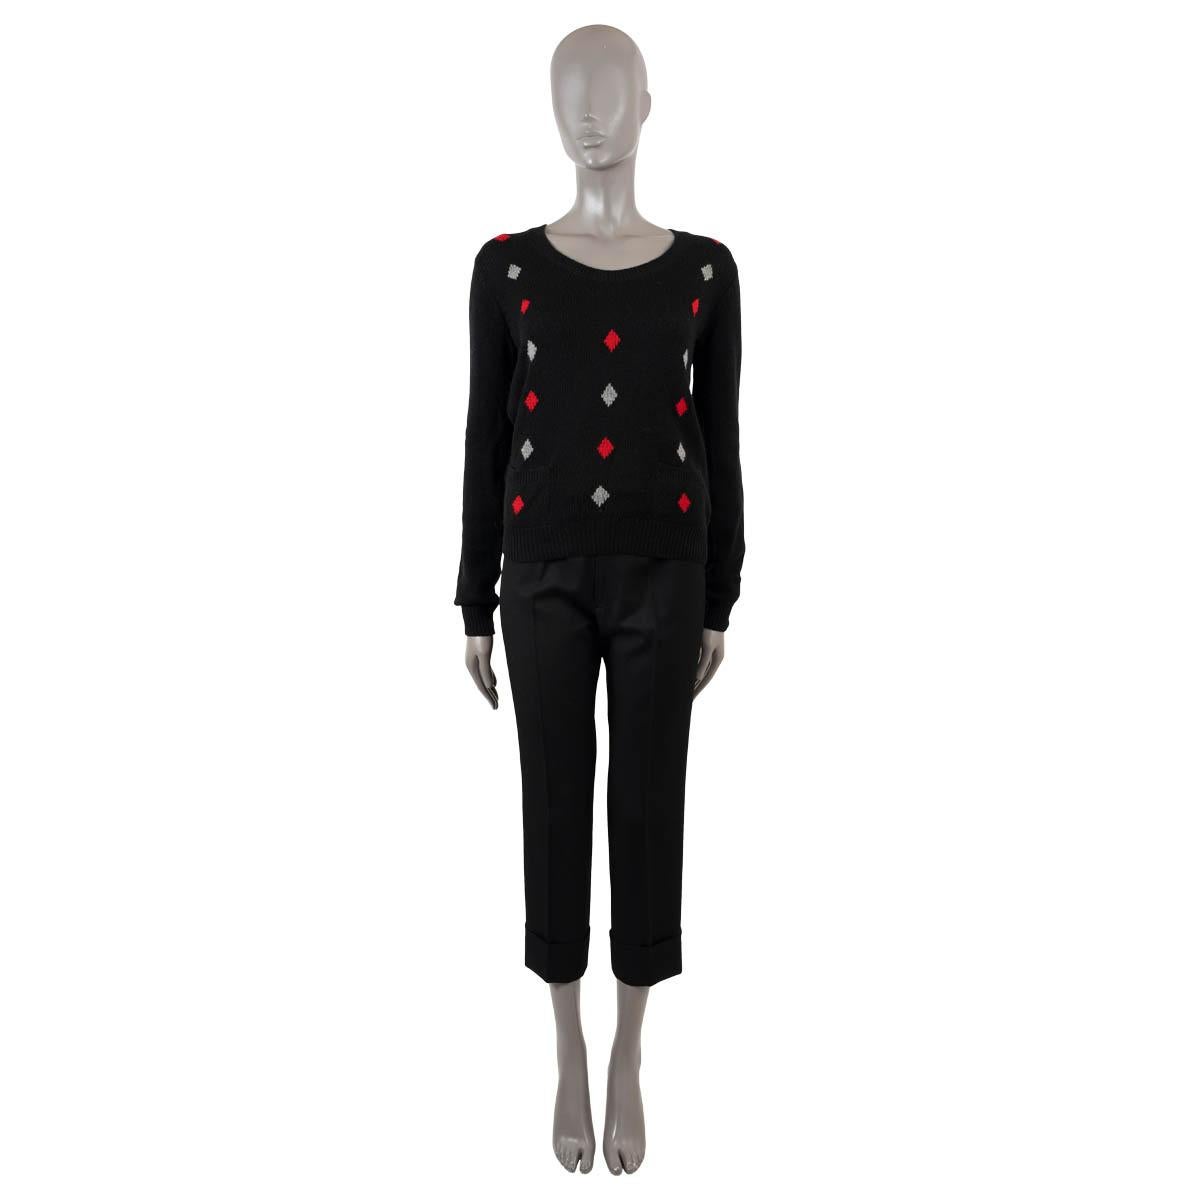 100% authentic Prada argyle sweater in black cashmere (100%) with details in red and ivory. Features a scoop neck, two pockets at the waist and rib-knit cuffs and hem. Unlined. Has been worn and is in excellent condition.

2016